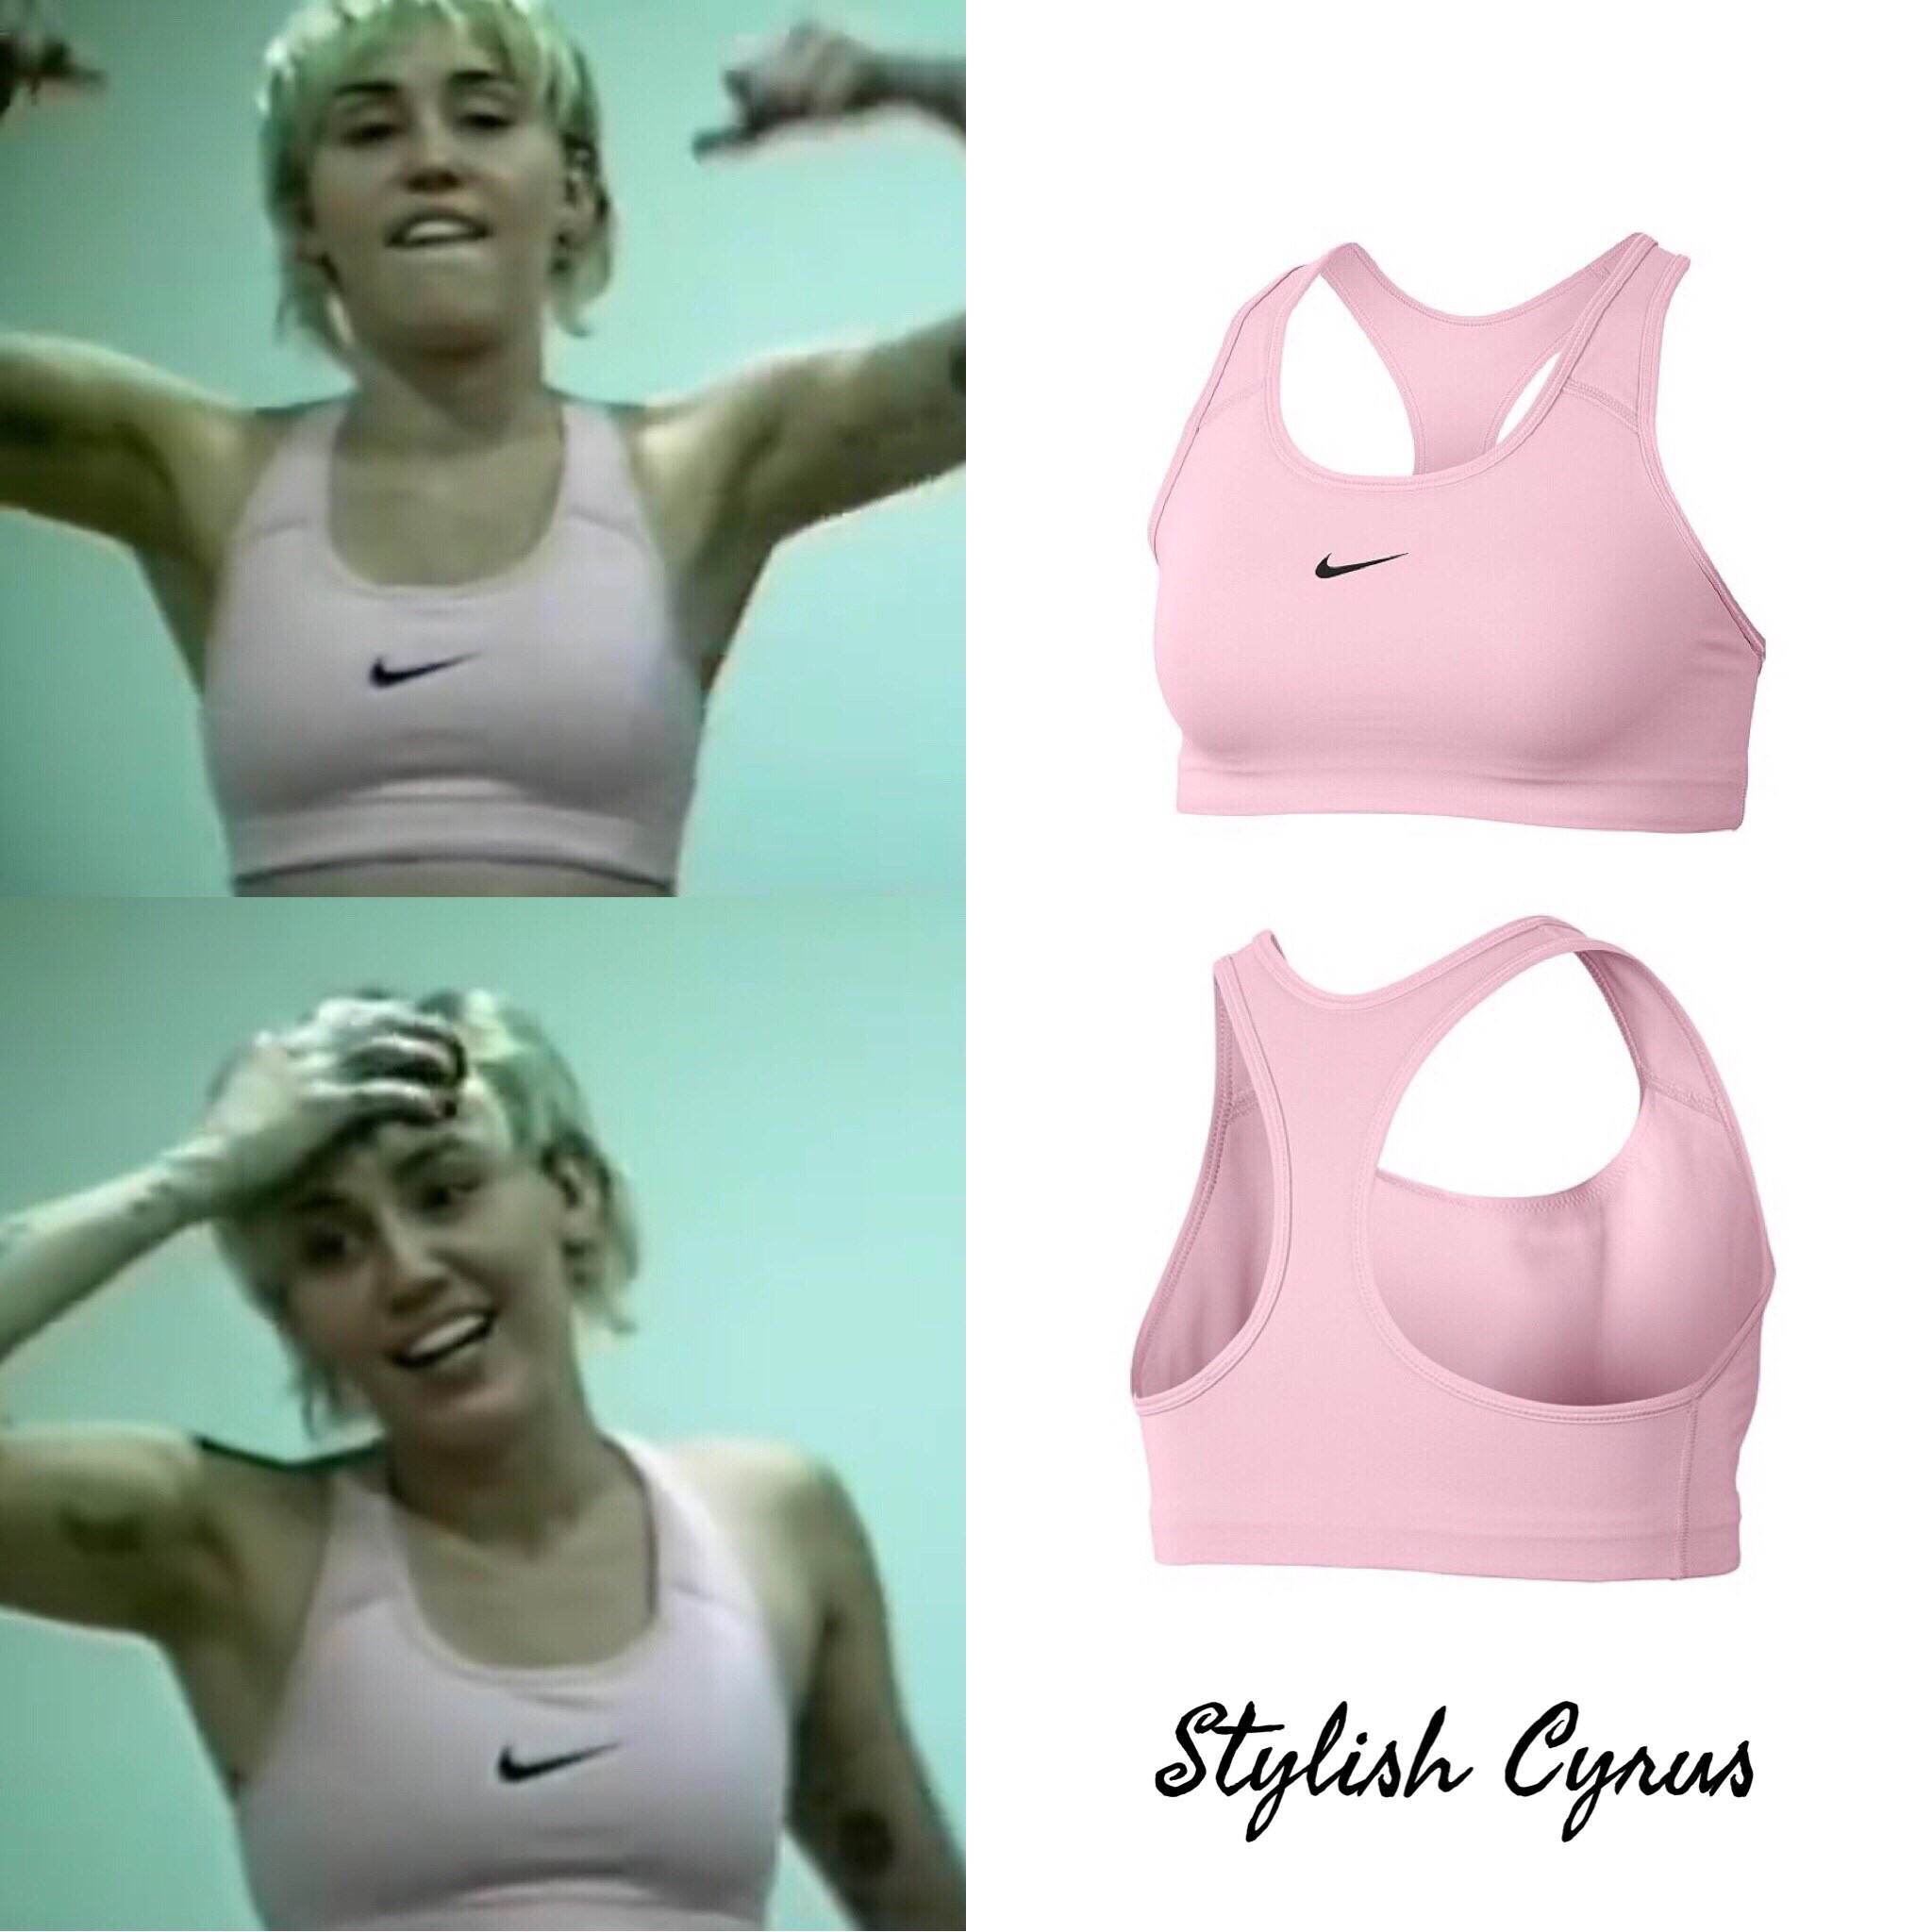 Miley Cyrus Fashion on X: .@mileycyrus wears a light pink swoosh sports bra  by @nike ($38) while training for her Super Bowl LV Tik Tok Tailgate  performance set 💪🏼 Watch the full